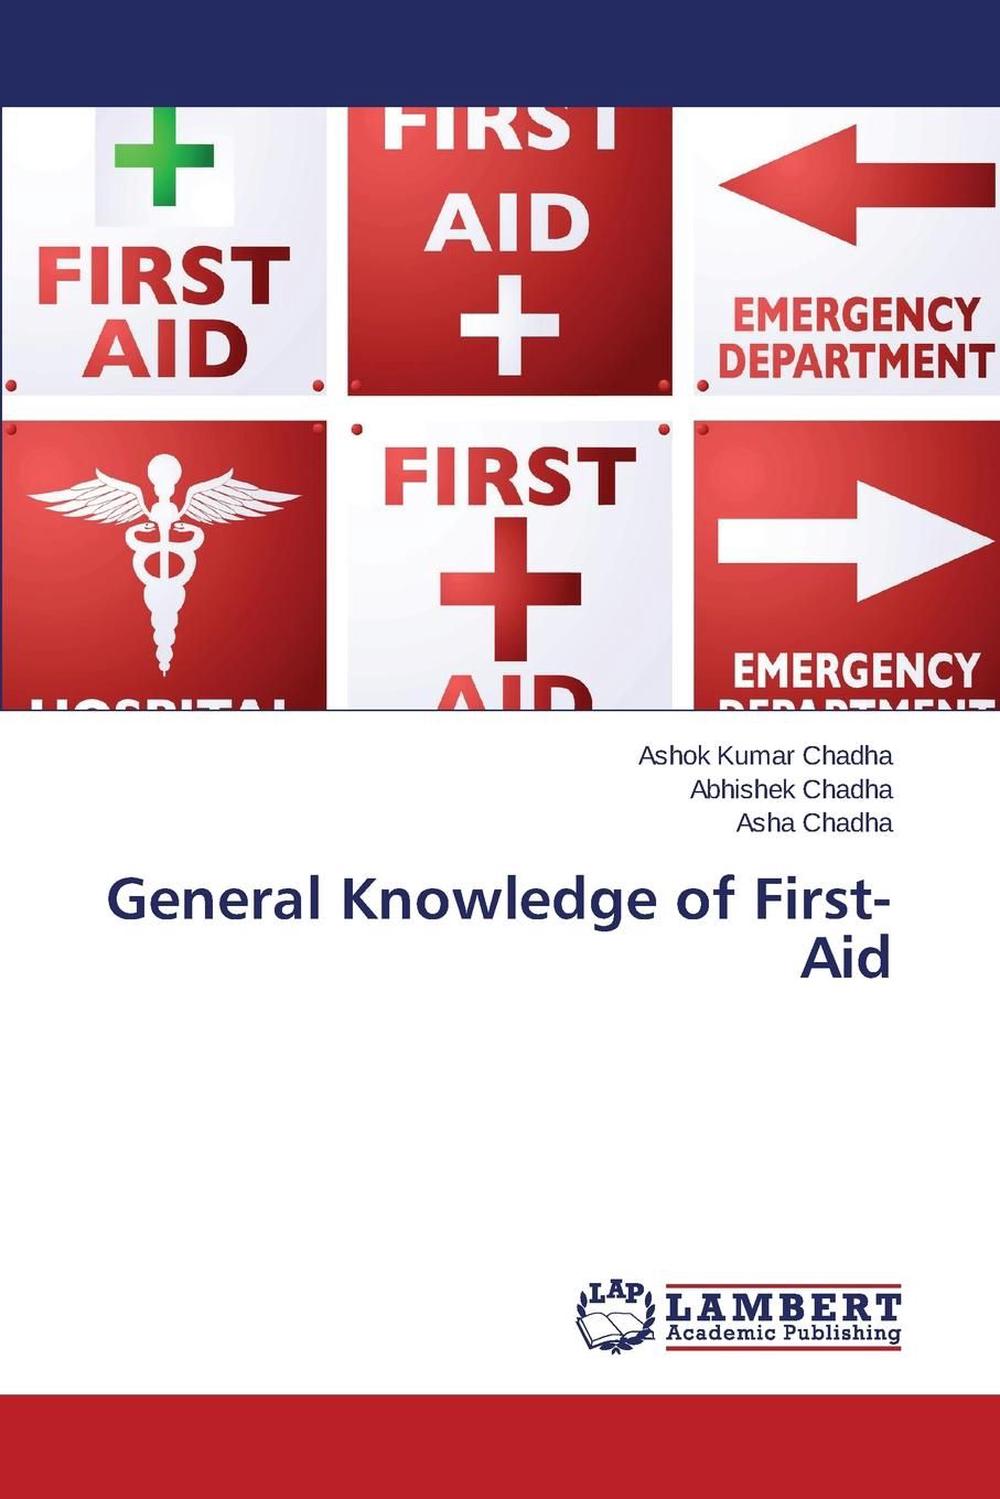 literature review on knowledge regarding first aid among students